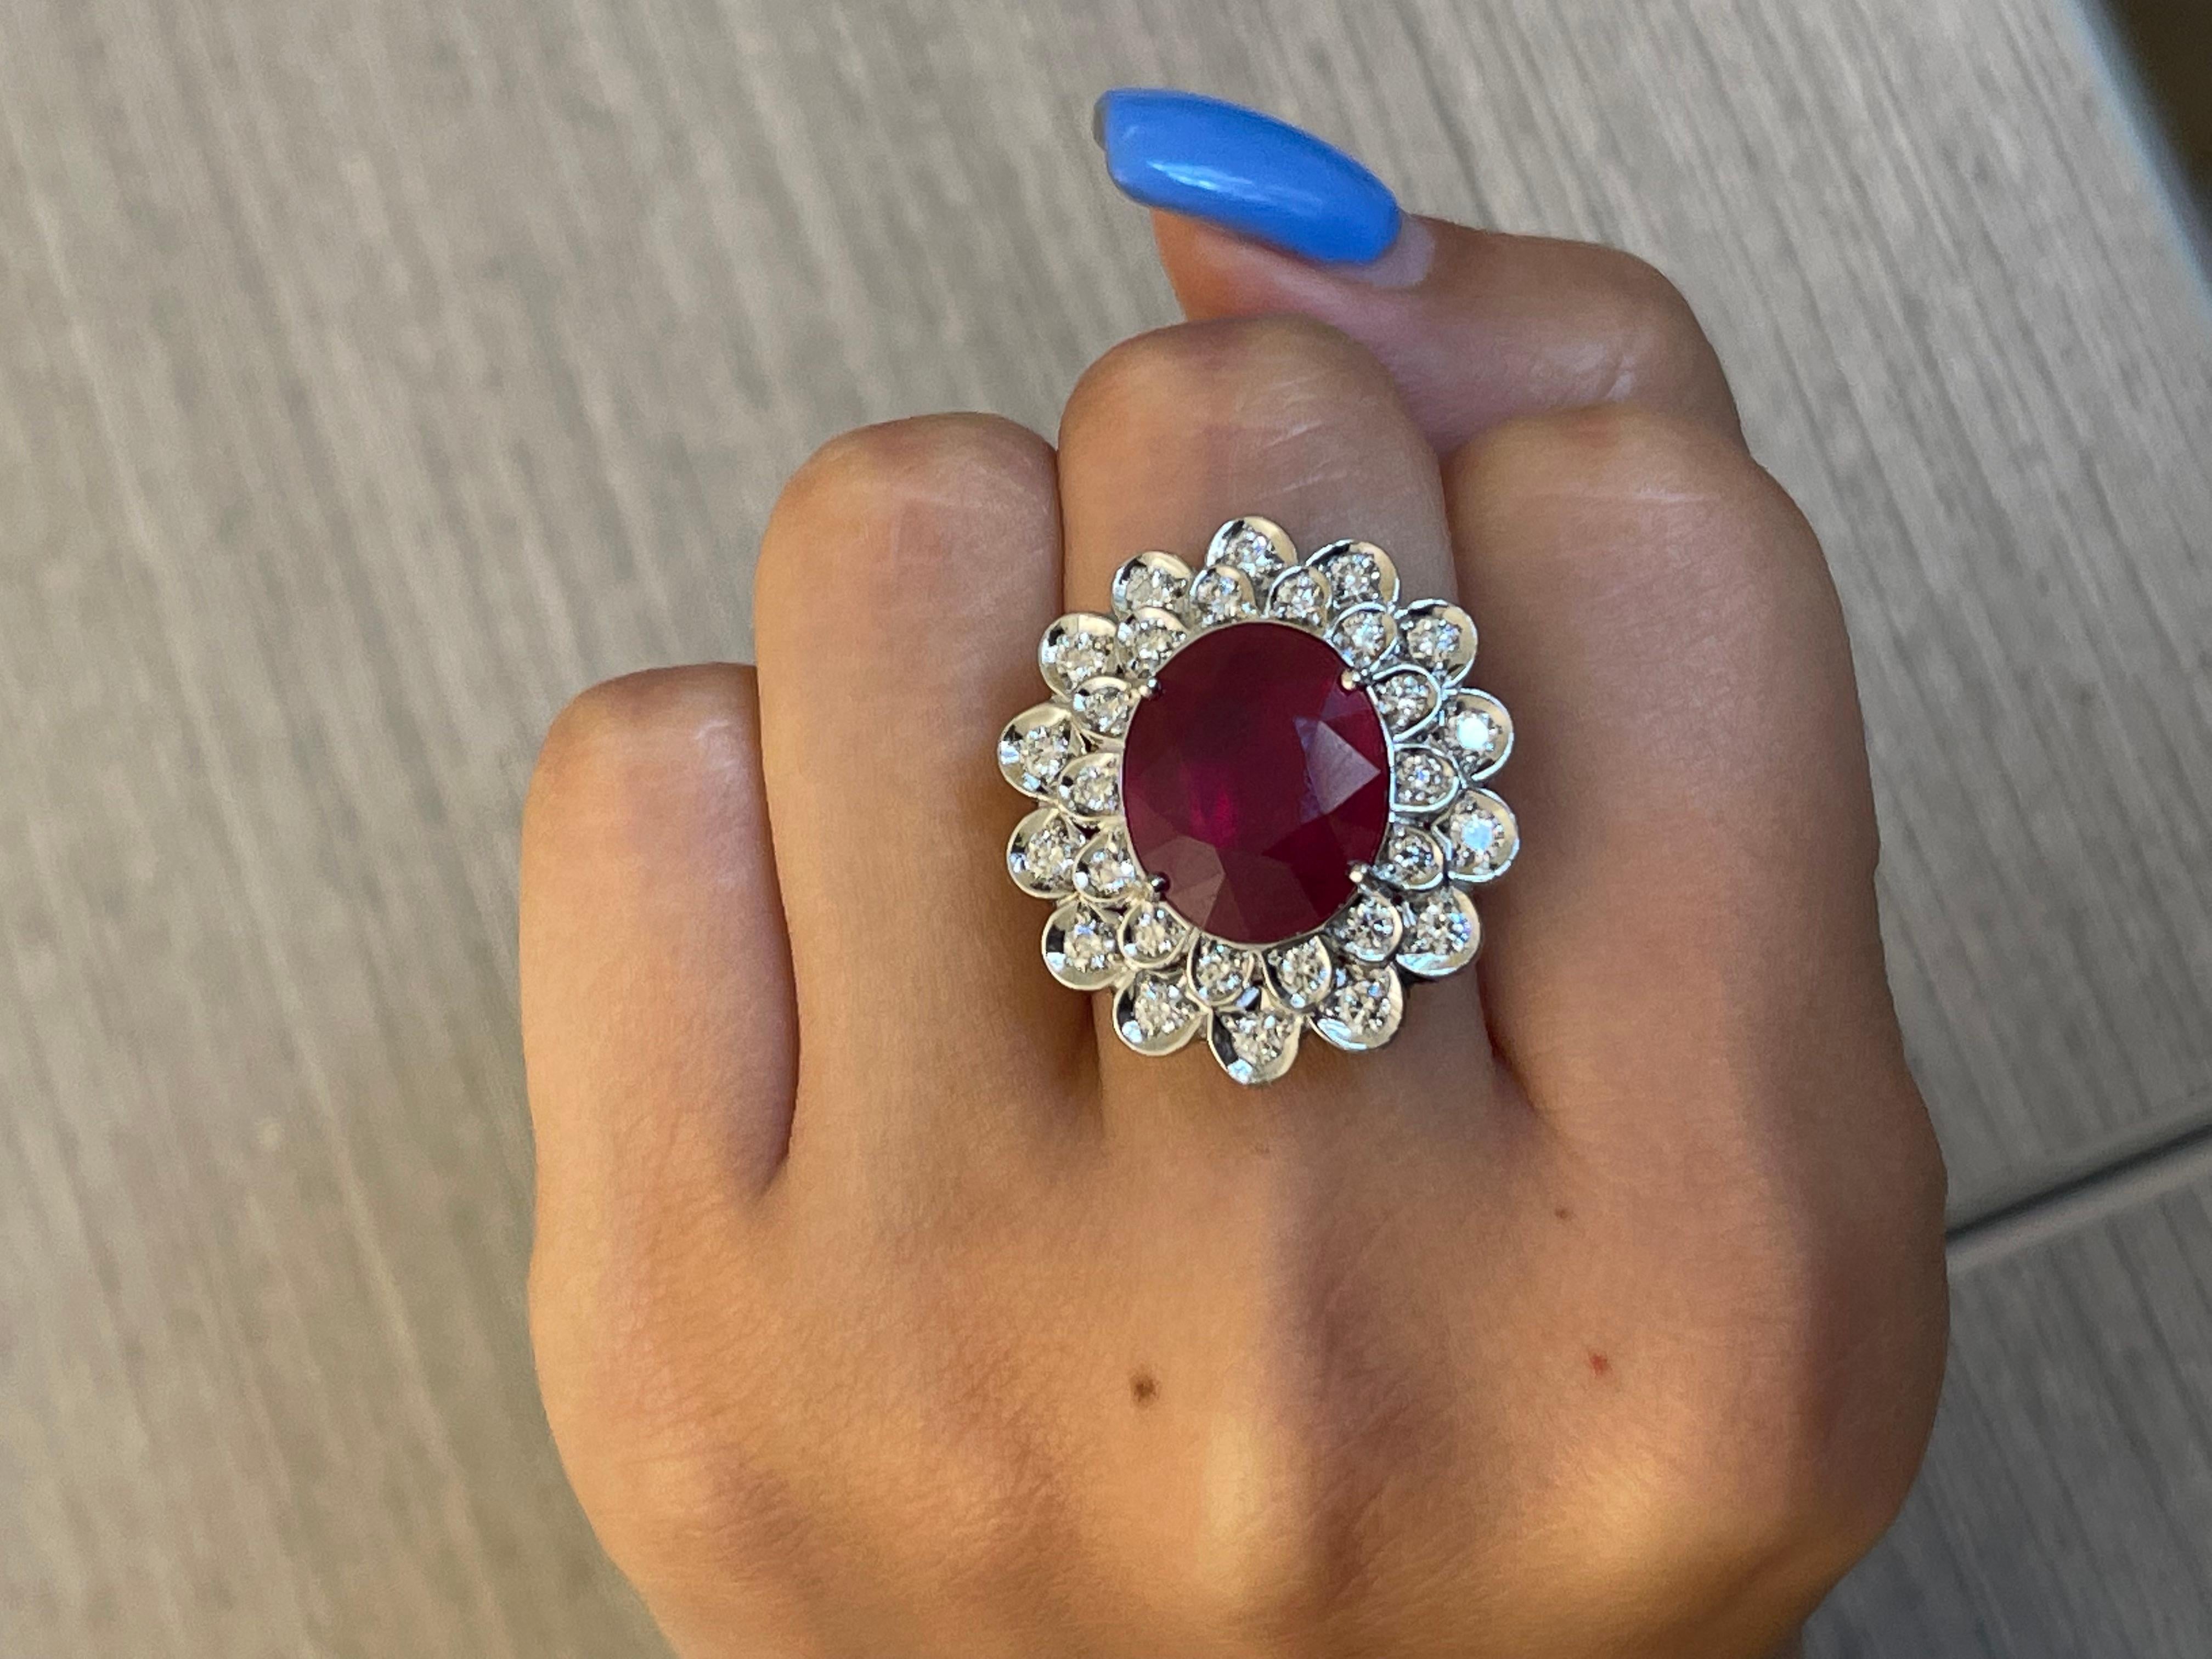 Ring White Gold 18 K Gianni Lazzaro (Matching Earrings Available)

Diamonds 28-1,09 ct HSI 
Ruby 1-9,58ct.

With a heritage of ancient fine Swiss jewelry traditions, NATKINA is a Geneva-based jewelry brand that creates modern jewelry masterpieces